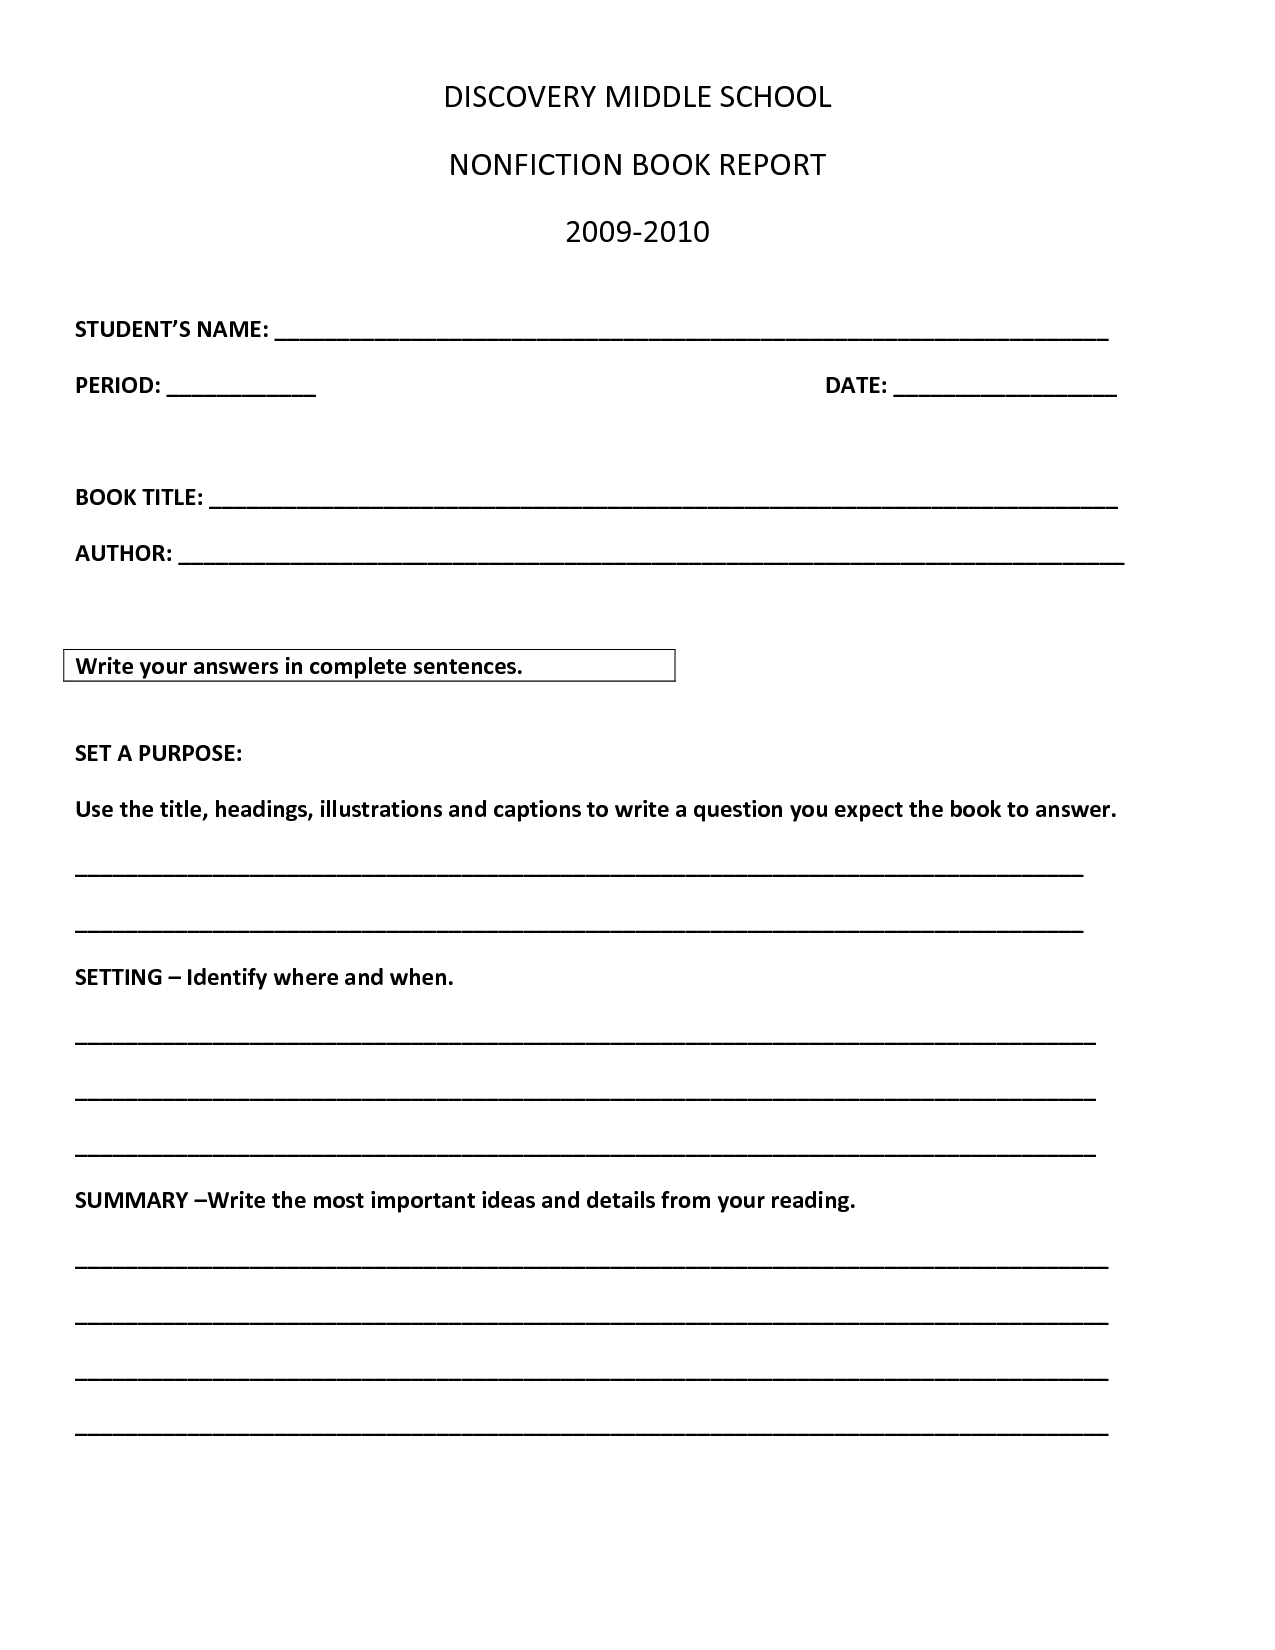 Book Report Template | Discovery Middle School Nonfiction Pertaining To Book Report Template High School